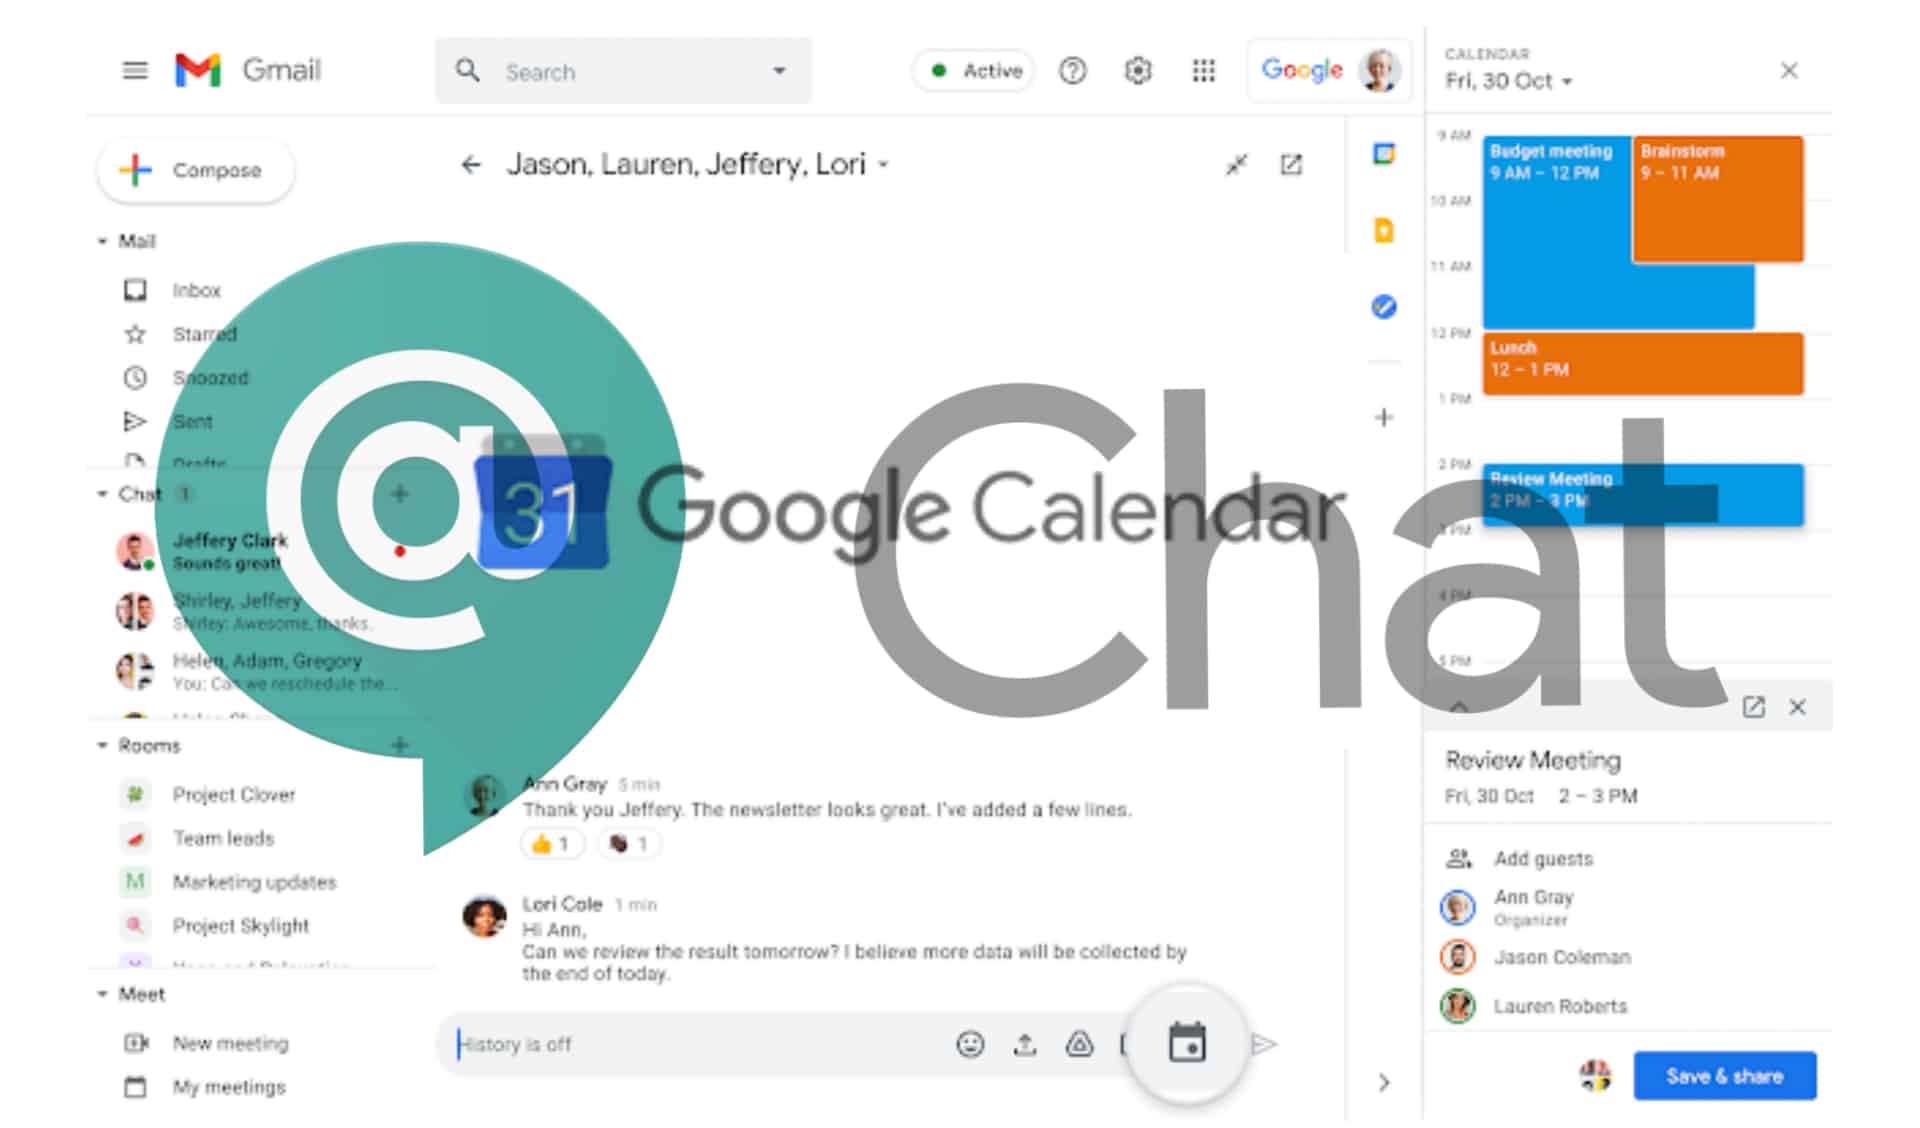 Google Chat Adds Shortcut for Calendar to Schedule Events Directly